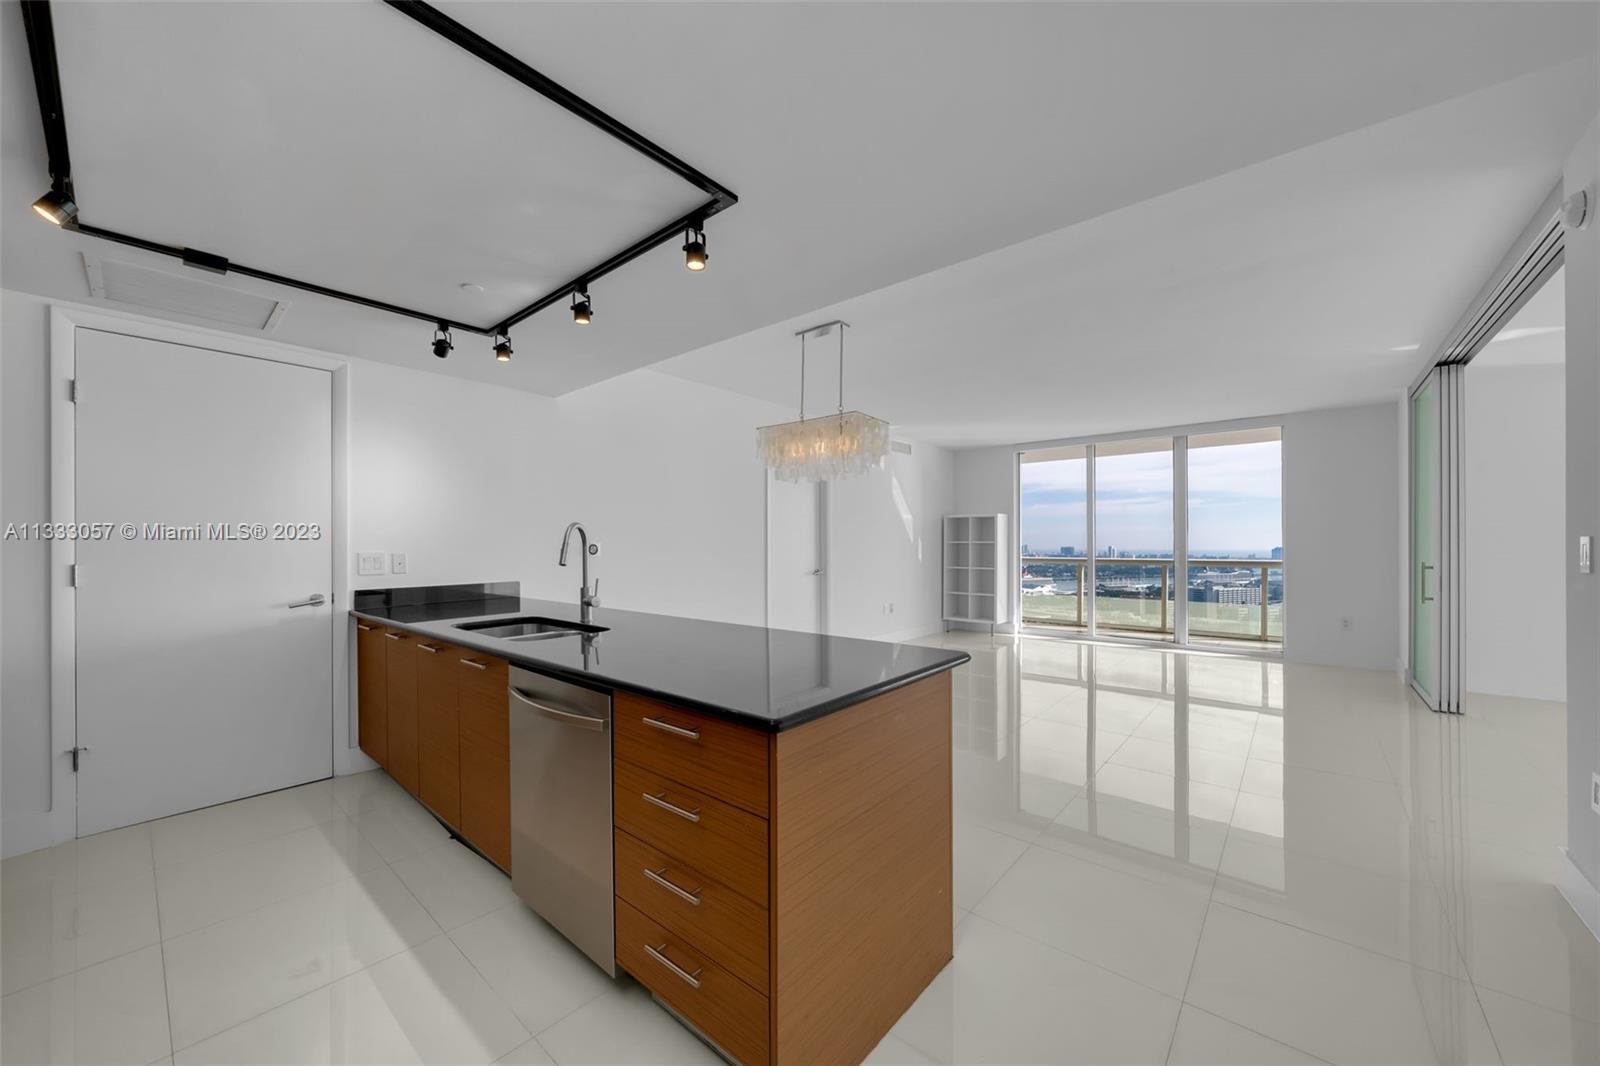 Photo 1 of 50 Biscayne Apt 3610 in Miami - MLS A11333057